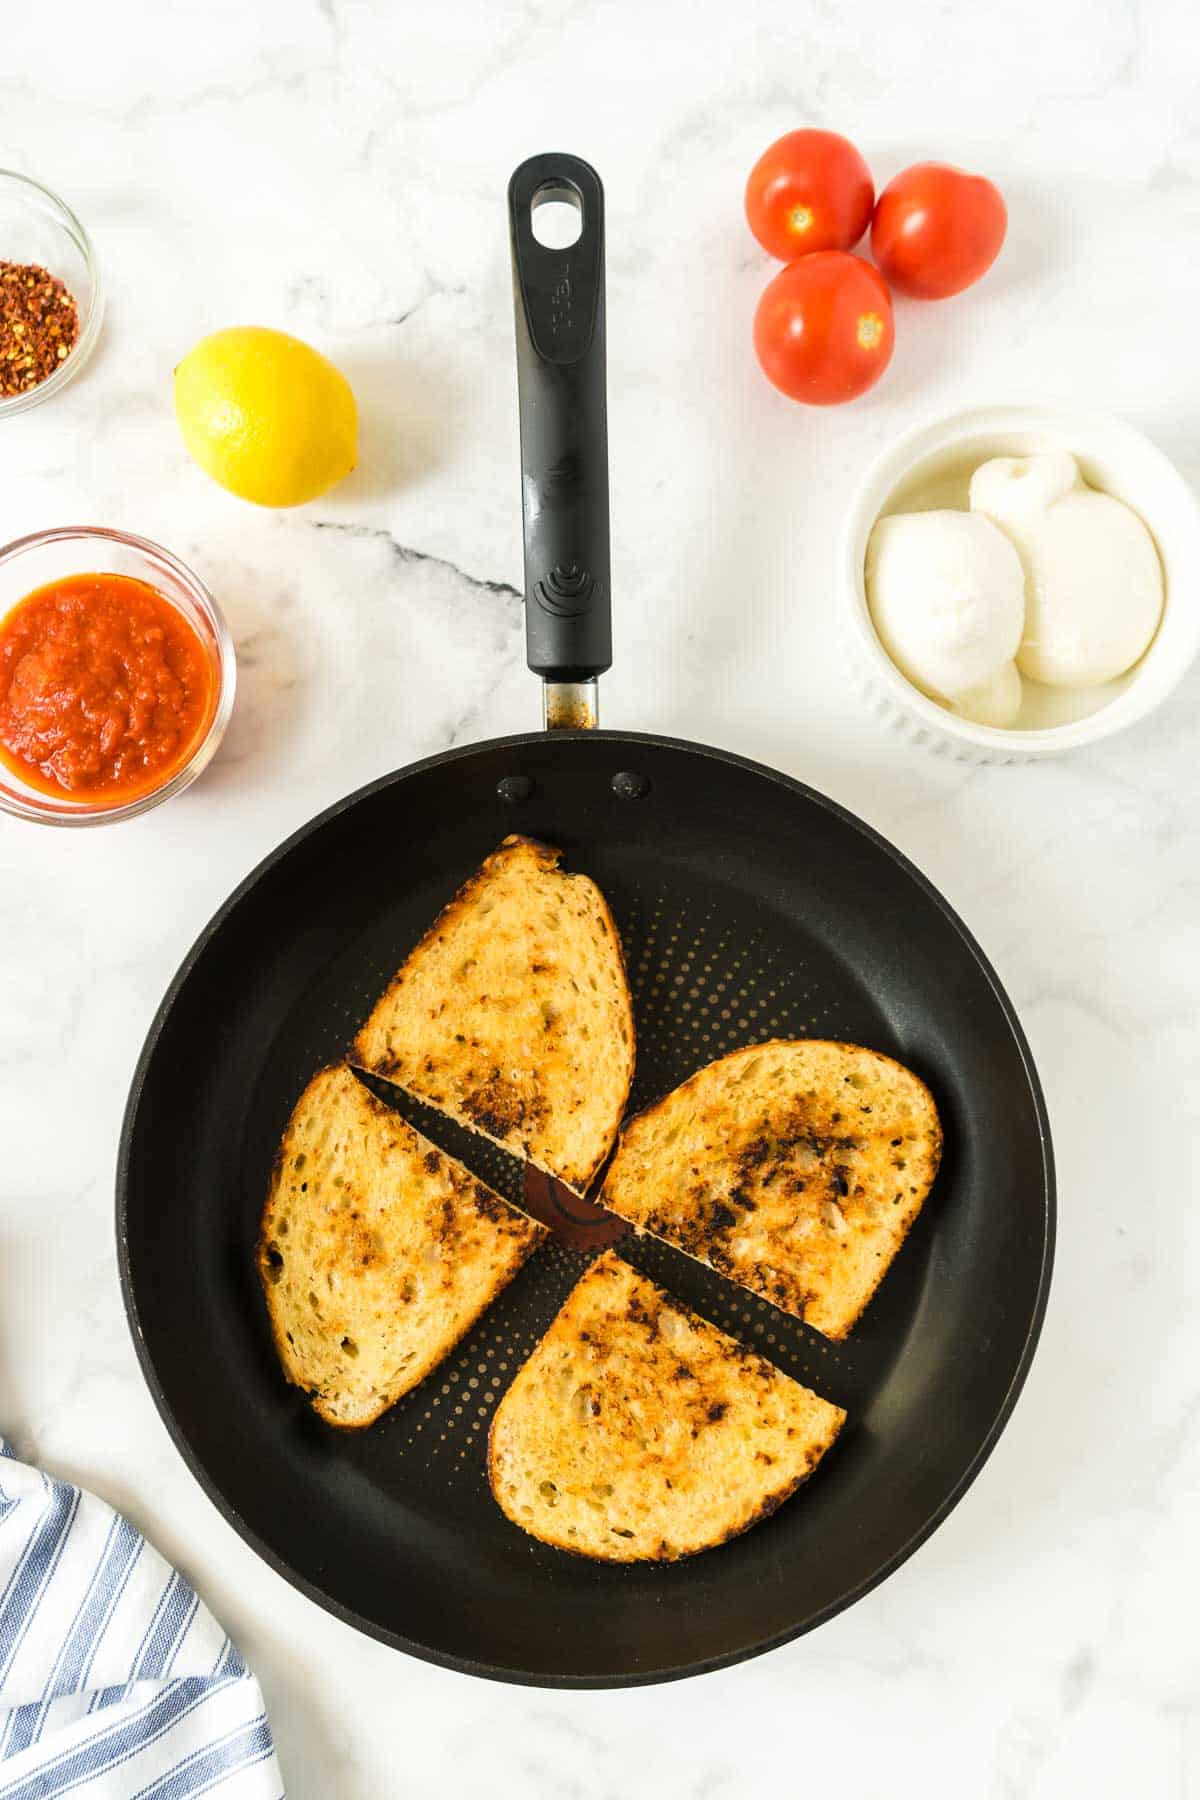 Bread toasting in a black skillet to make the viral pizza toast recipe.